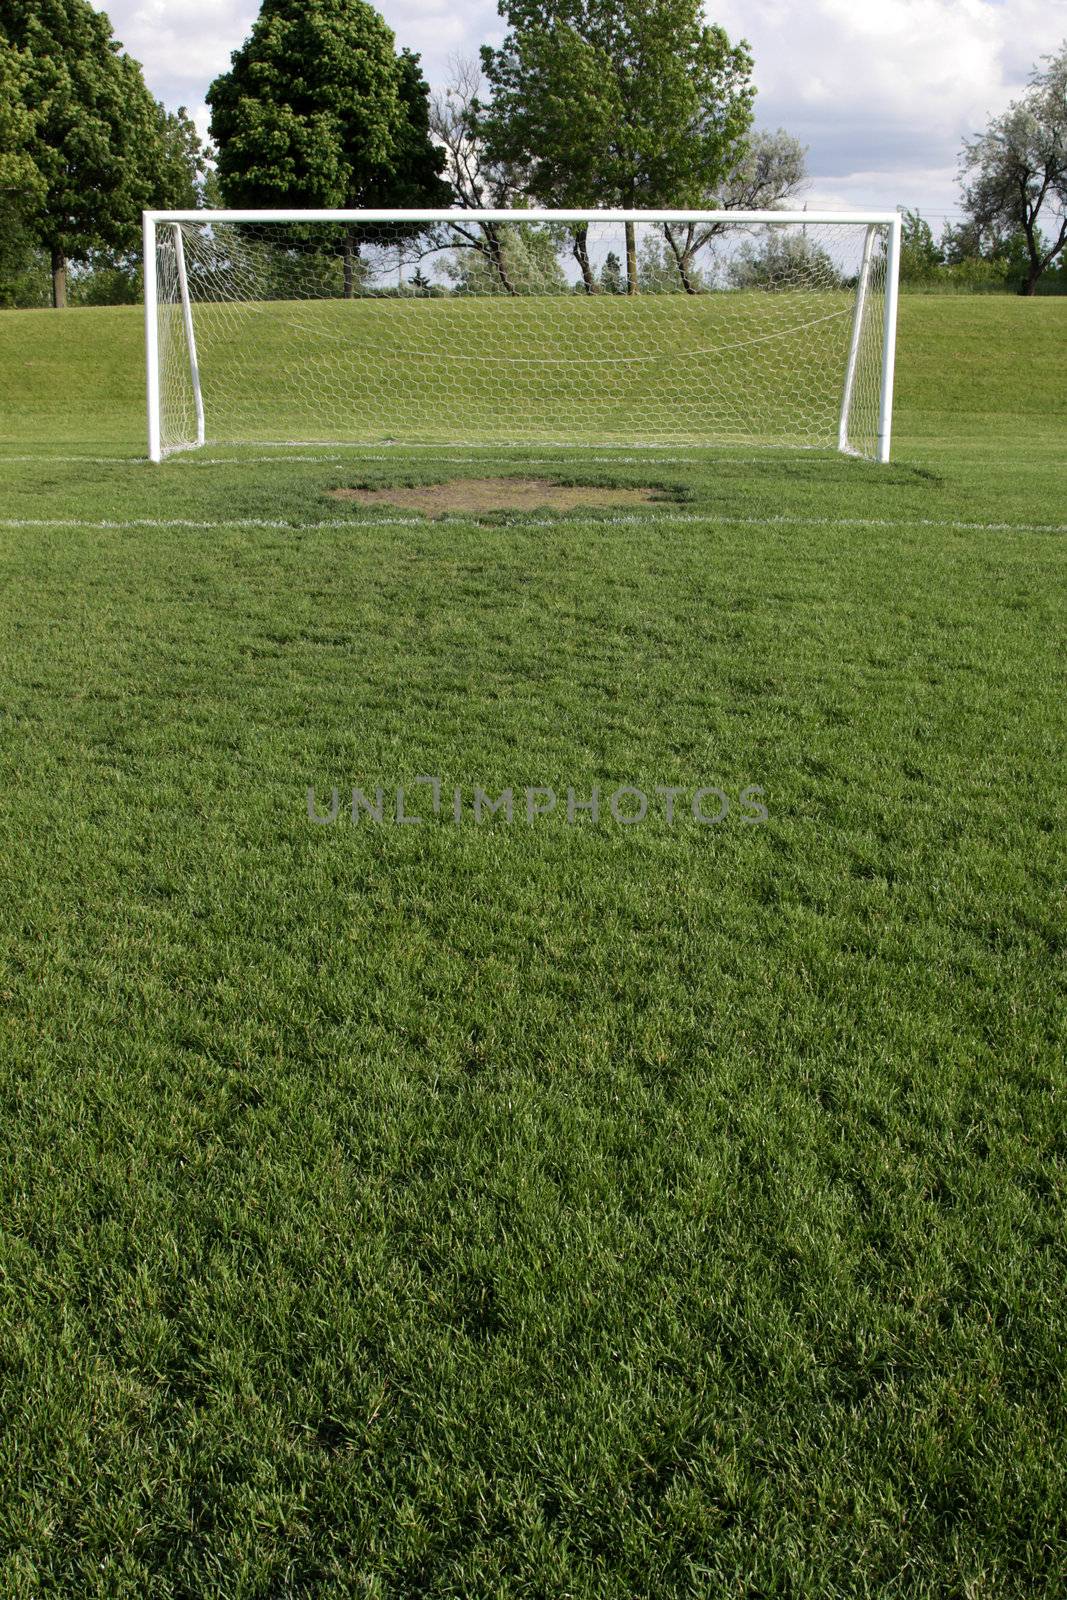 A view of a net on a vacant soccer pitch.